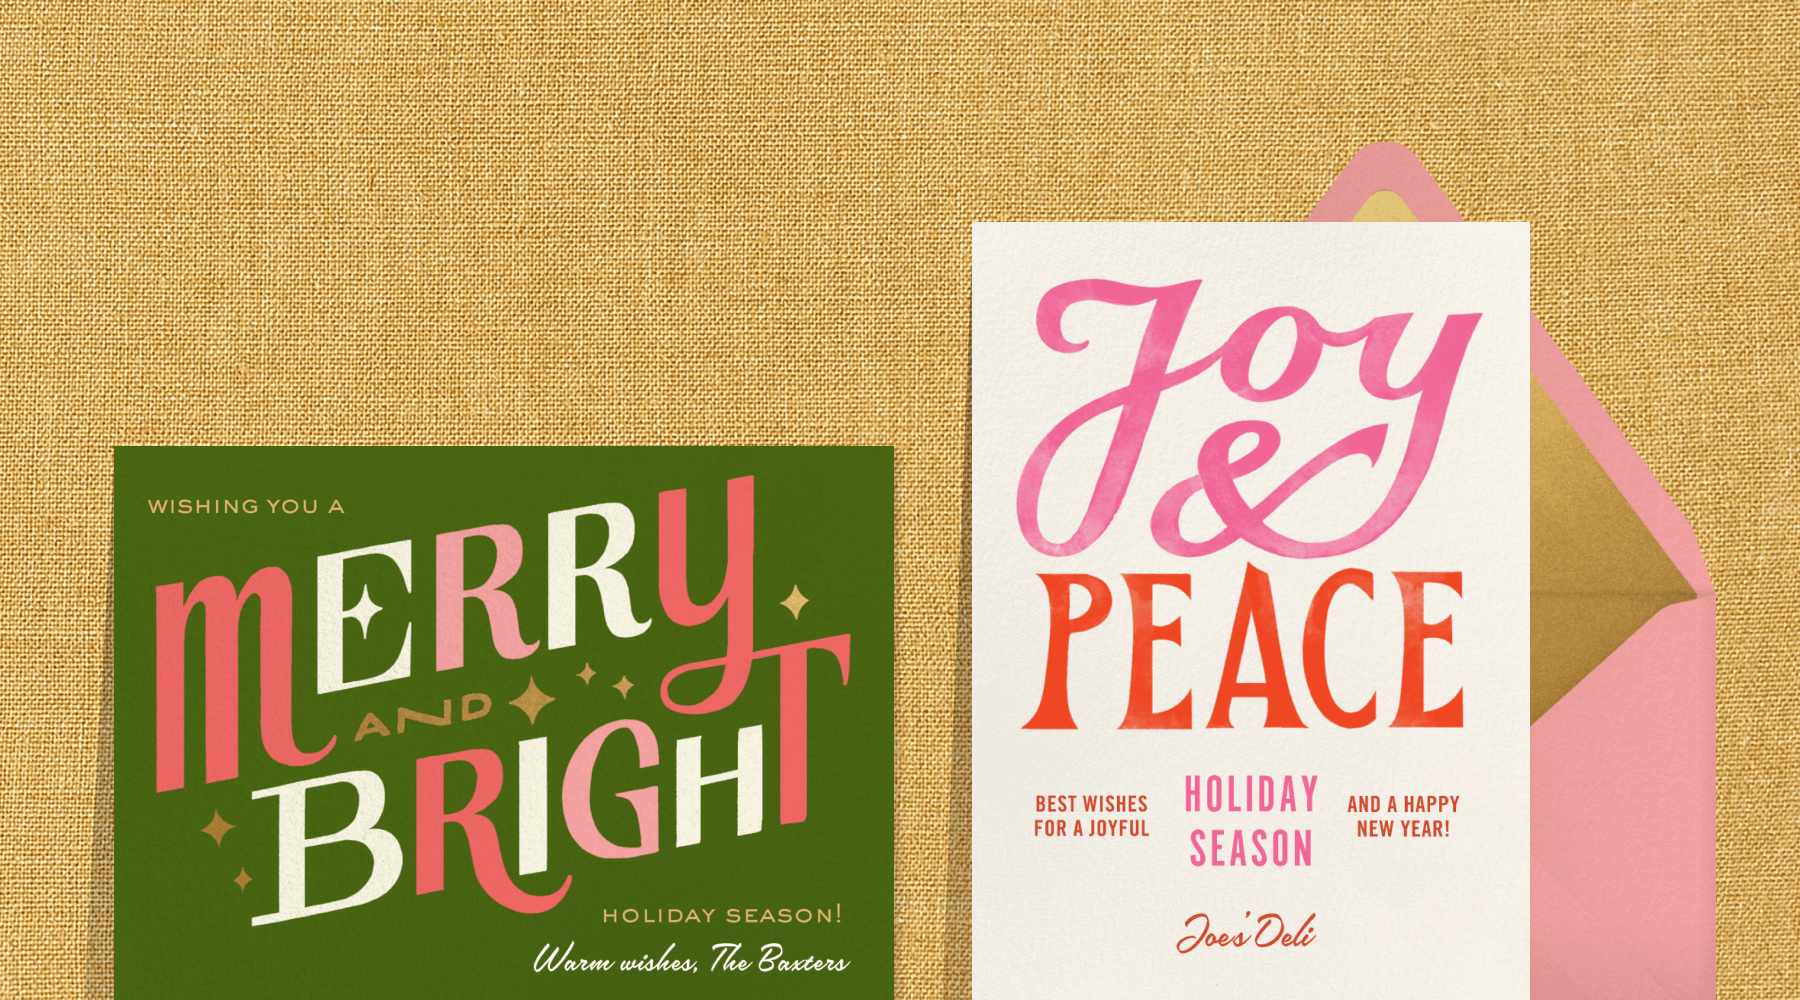 A green card reads “MERRY AND BRIGHT” in pink and white retro block letters; a card says “JOY & PEACE” in pink and red block letters.